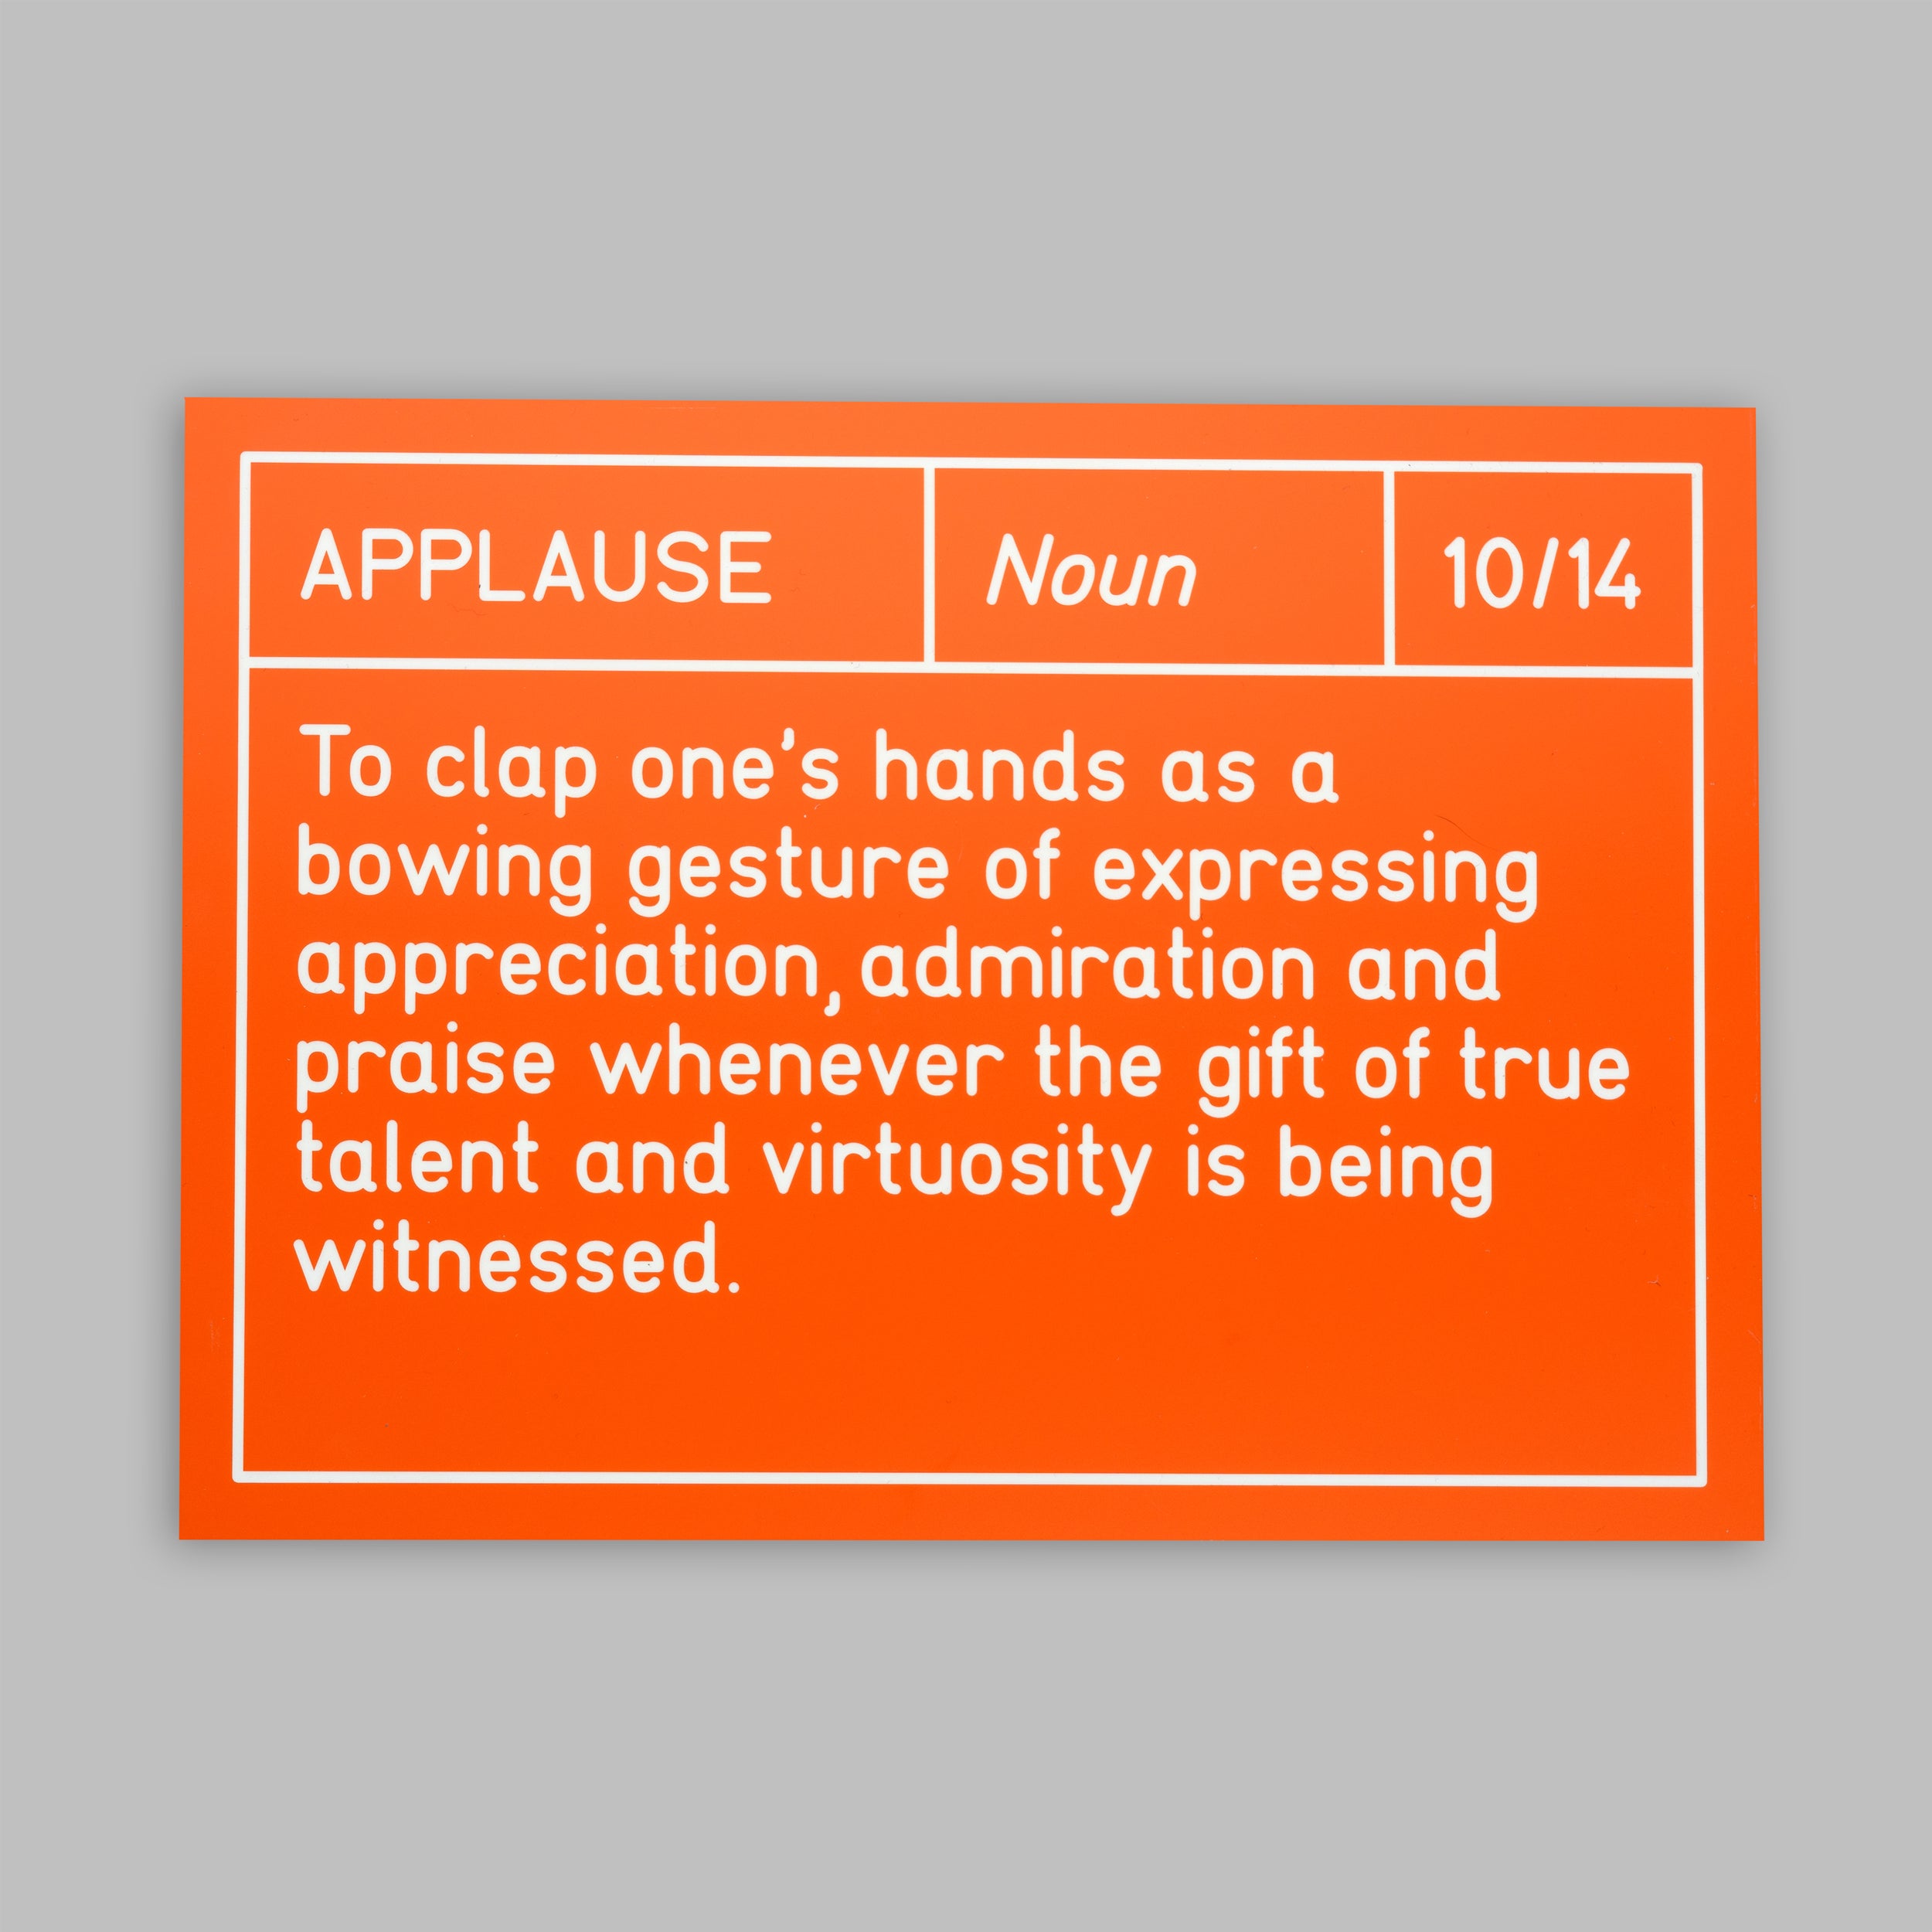 Applause - Sign 10/14